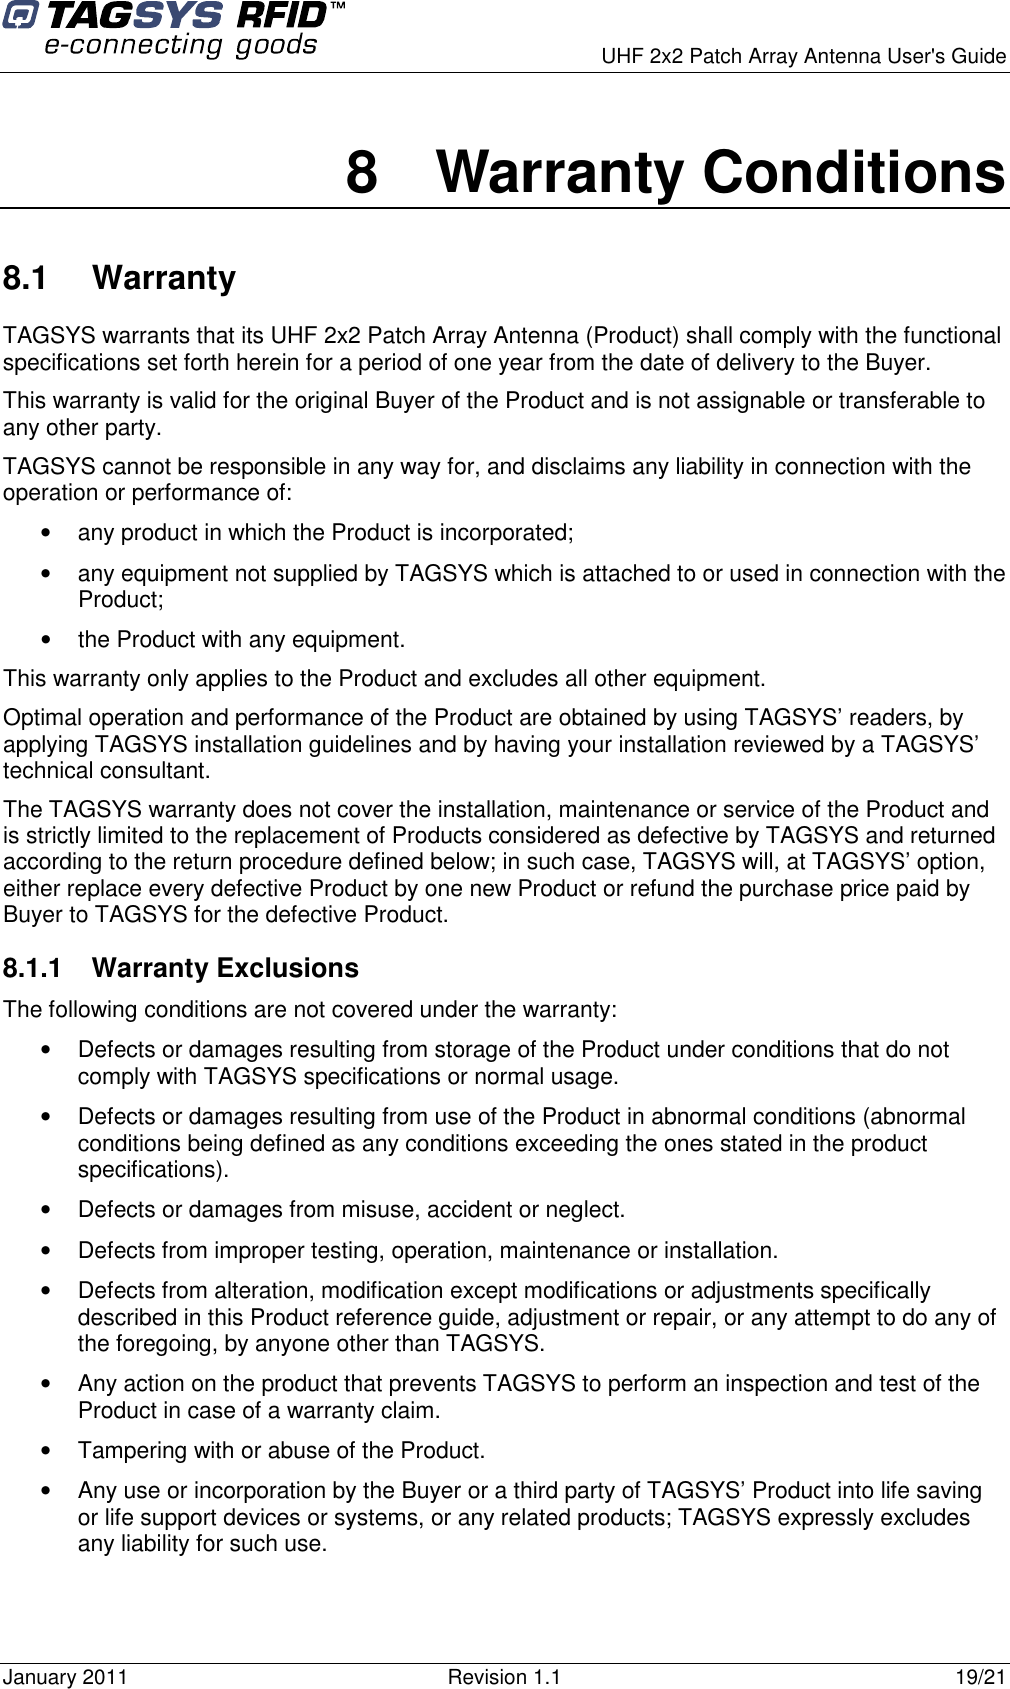      UHF 2x2 Patch Array Antenna User&apos;s Guide January 2011  Revision 1.1  19/21 8  Warranty Conditions 8.1  Warranty TAGSYS warrants that its UHF 2x2 Patch Array Antenna (Product) shall comply with the functional specifications set forth herein for a period of one year from the date of delivery to the Buyer. This warranty is valid for the original Buyer of the Product and is not assignable or transferable to any other party. TAGSYS cannot be responsible in any way for, and disclaims any liability in connection with the operation or performance of: •  any product in which the Product is incorporated; •  any equipment not supplied by TAGSYS which is attached to or used in connection with the Product; •  the Product with any equipment. This warranty only applies to the Product and excludes all other equipment. Optimal operation and performance of the Product are obtained by using TAGSYS’ readers, by applying TAGSYS installation guidelines and by having your installation reviewed by a TAGSYS’ technical consultant. The TAGSYS warranty does not cover the installation, maintenance or service of the Product and is strictly limited to the replacement of Products considered as defective by TAGSYS and returned according to the return procedure defined below; in such case, TAGSYS will, at TAGSYS’ option, either replace every defective Product by one new Product or refund the purchase price paid by Buyer to TAGSYS for the defective Product. 8.1.1  Warranty Exclusions  The following conditions are not covered under the warranty: •  Defects or damages resulting from storage of the Product under conditions that do not comply with TAGSYS specifications or normal usage. •  Defects or damages resulting from use of the Product in abnormal conditions (abnormal conditions being defined as any conditions exceeding the ones stated in the product specifications). •  Defects or damages from misuse, accident or neglect. •  Defects from improper testing, operation, maintenance or installation. •  Defects from alteration, modification except modifications or adjustments specifically described in this Product reference guide, adjustment or repair, or any attempt to do any of the foregoing, by anyone other than TAGSYS. •  Any action on the product that prevents TAGSYS to perform an inspection and test of the Product in case of a warranty claim. •  Tampering with or abuse of the Product. •  Any use or incorporation by the Buyer or a third party of TAGSYS’ Product into life saving or life support devices or systems, or any related products; TAGSYS expressly excludes any liability for such use. 